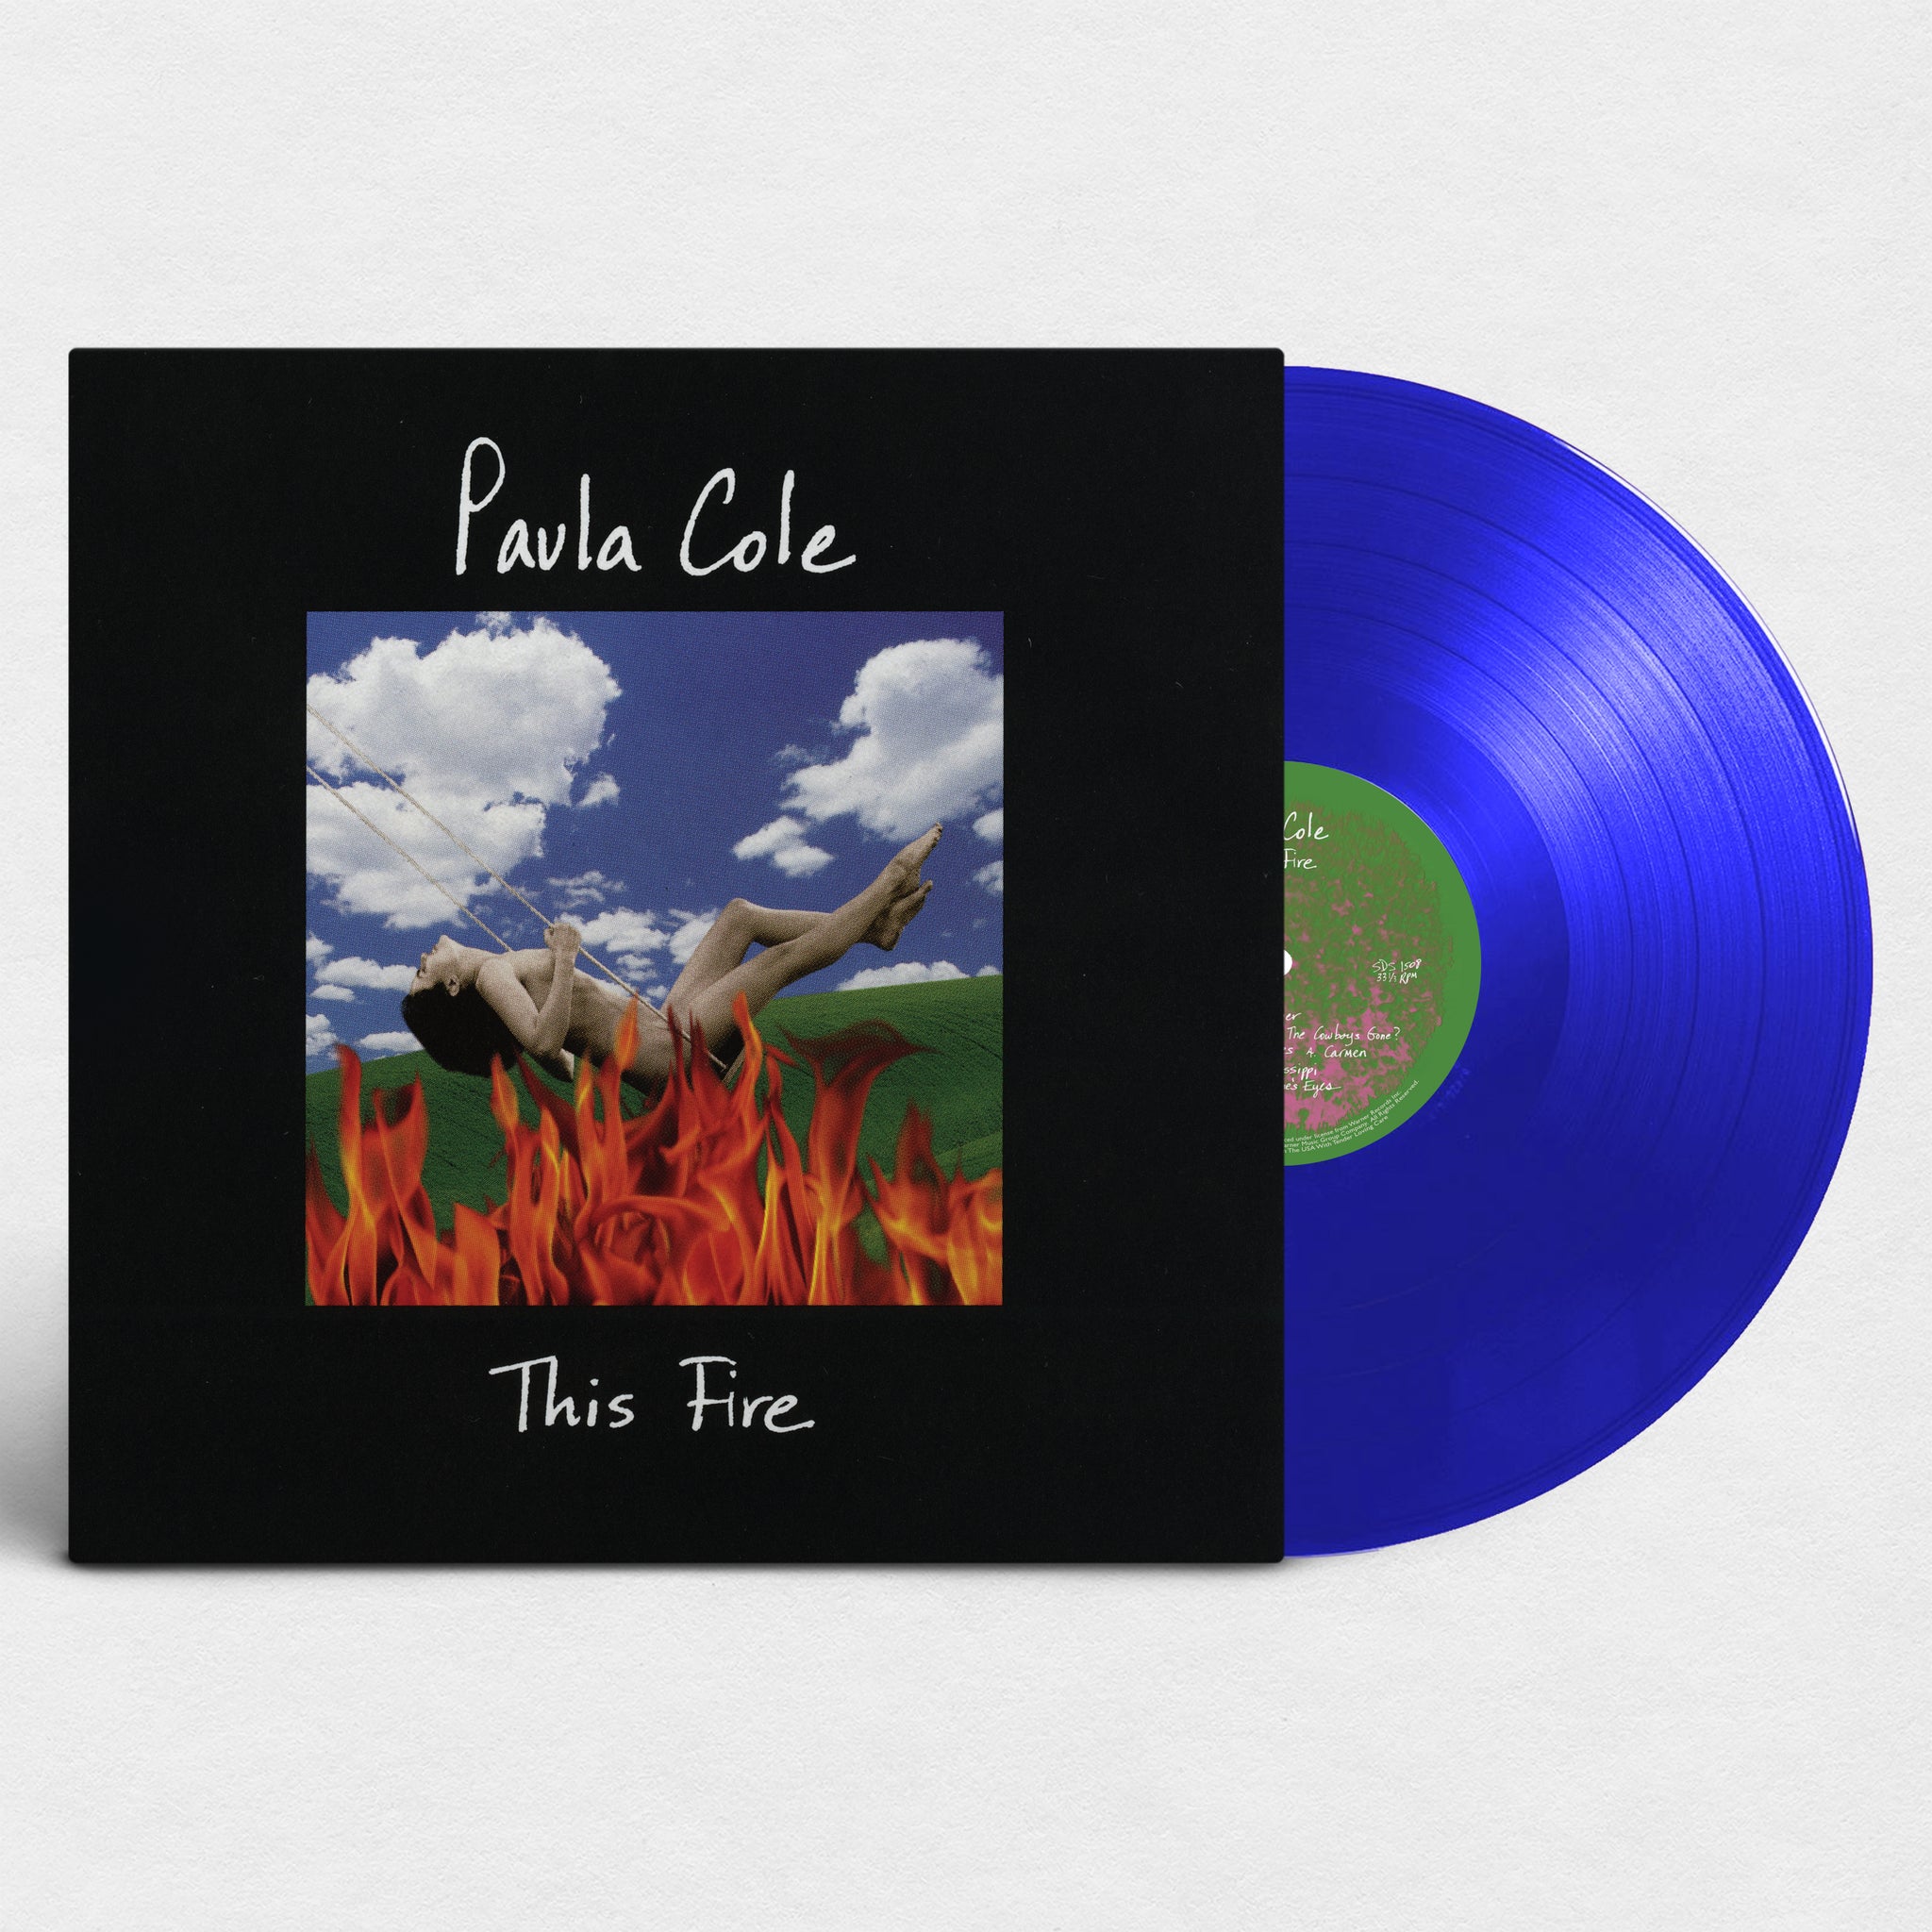 Paula Cole "This Fire" - Indie Translucent Blue [Ltd. Quantities] Now Shipping